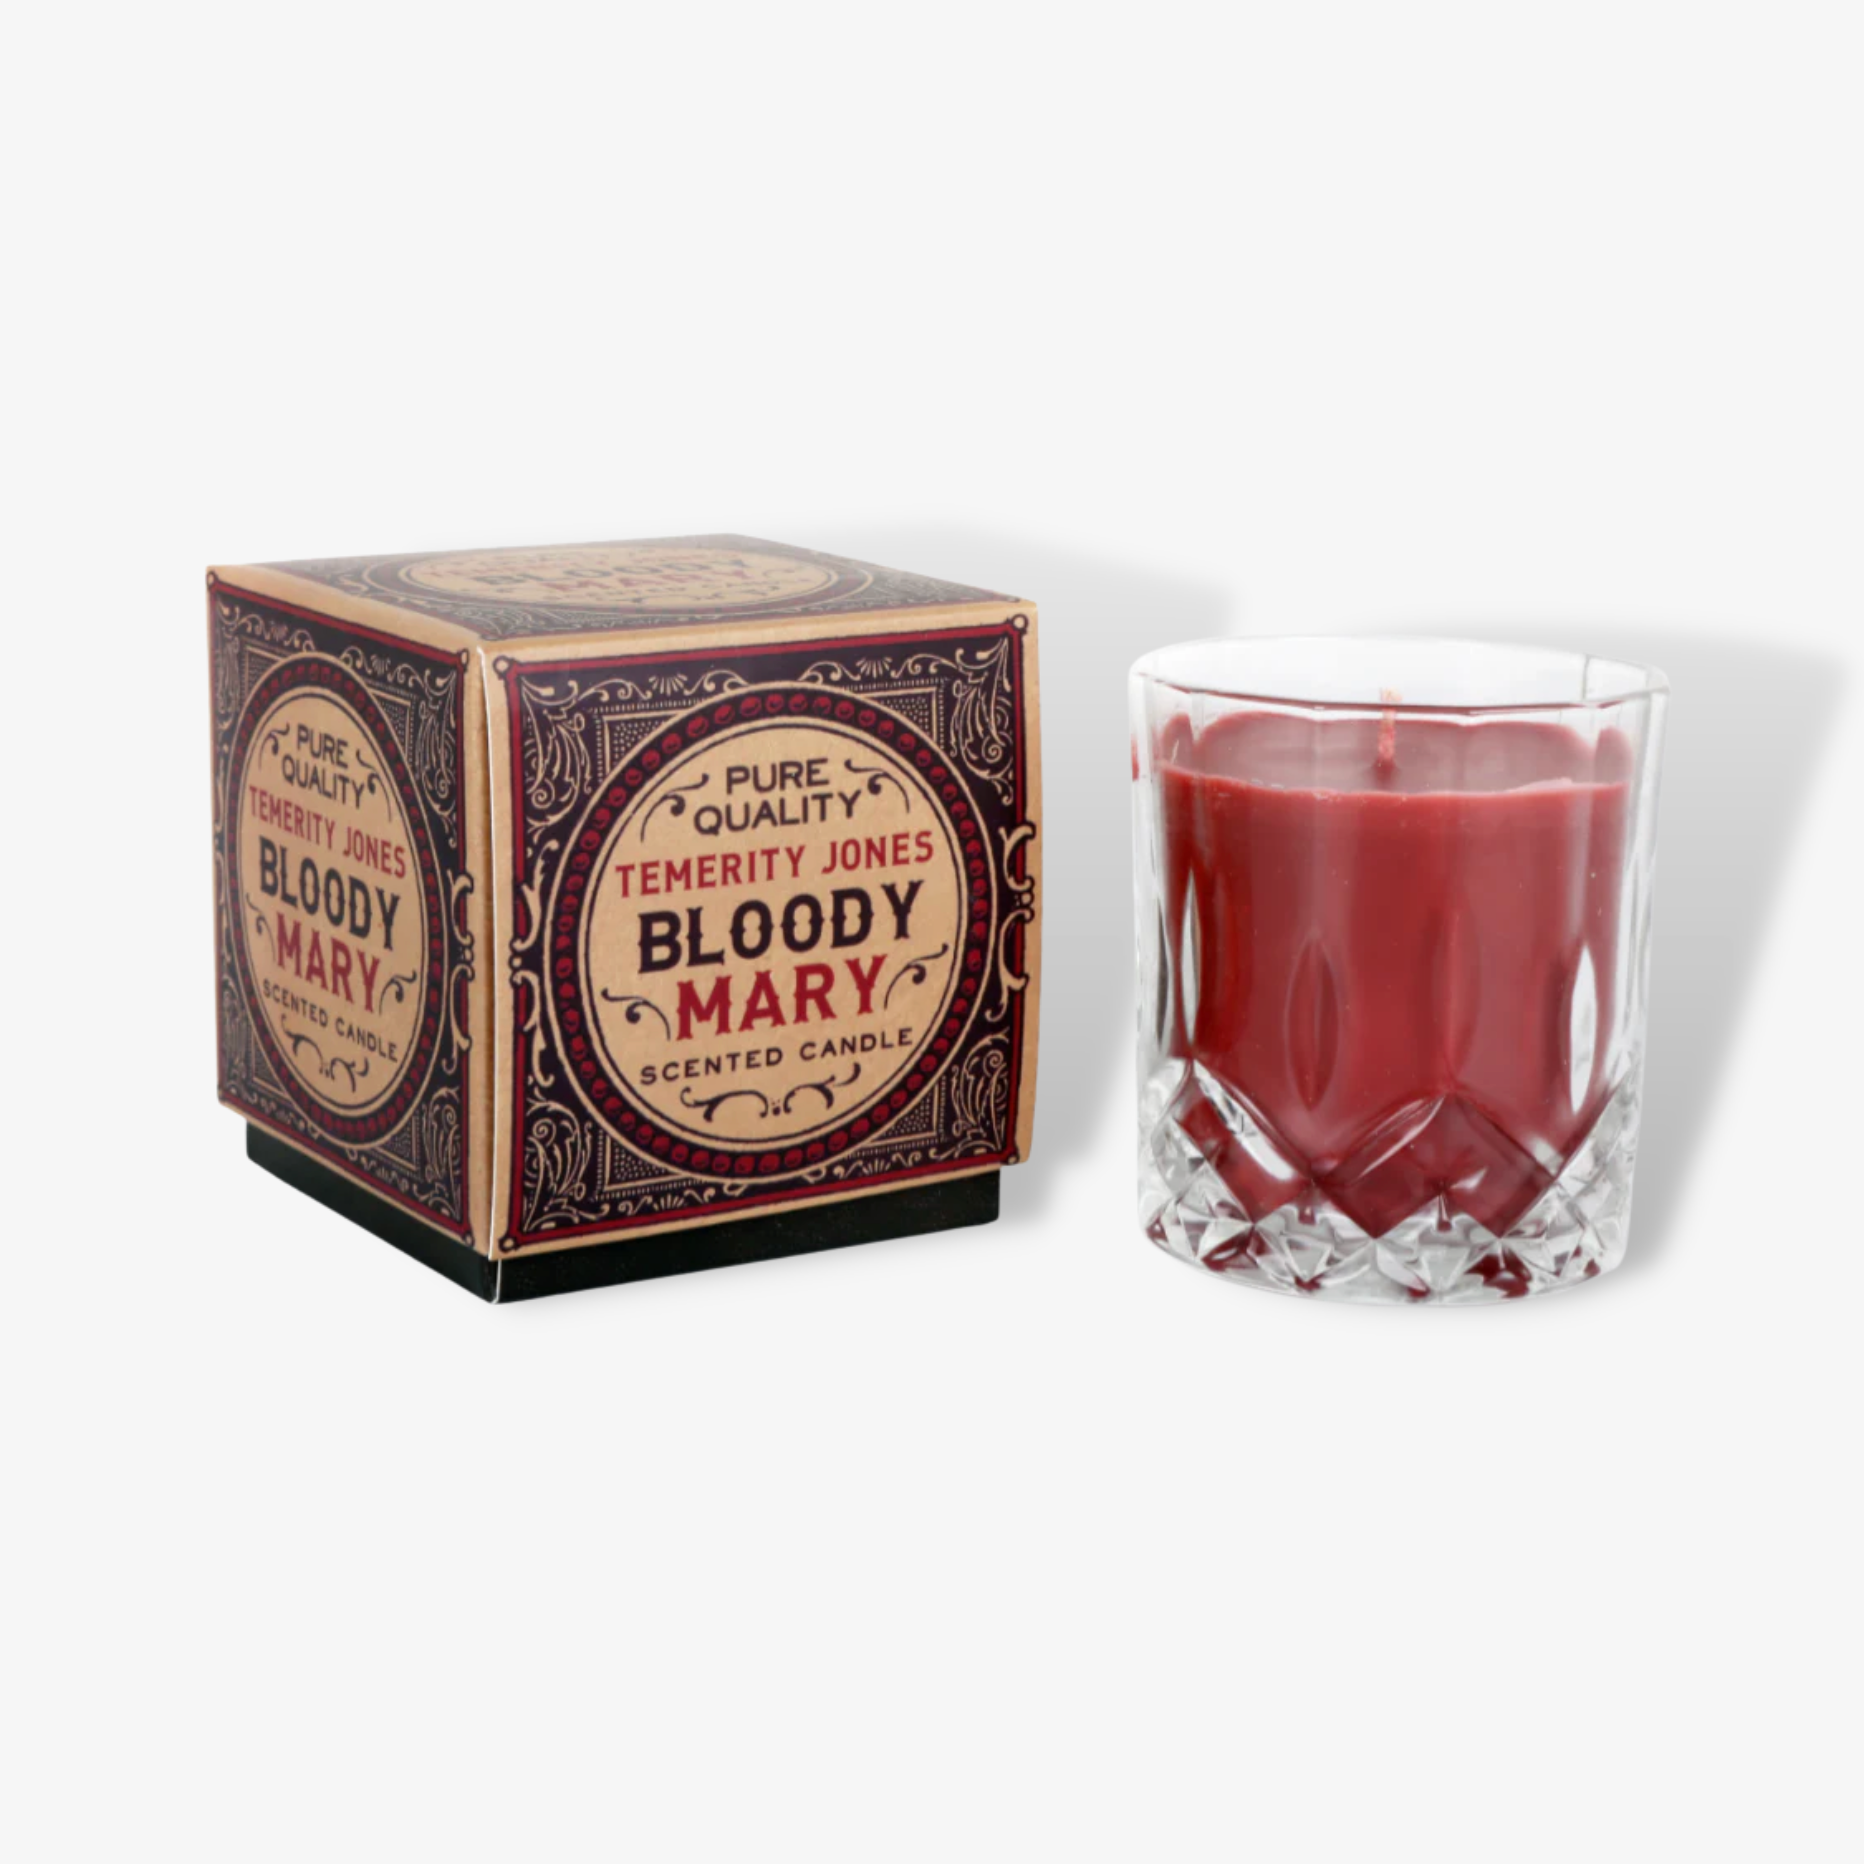 Bloody Mary Scented Candle